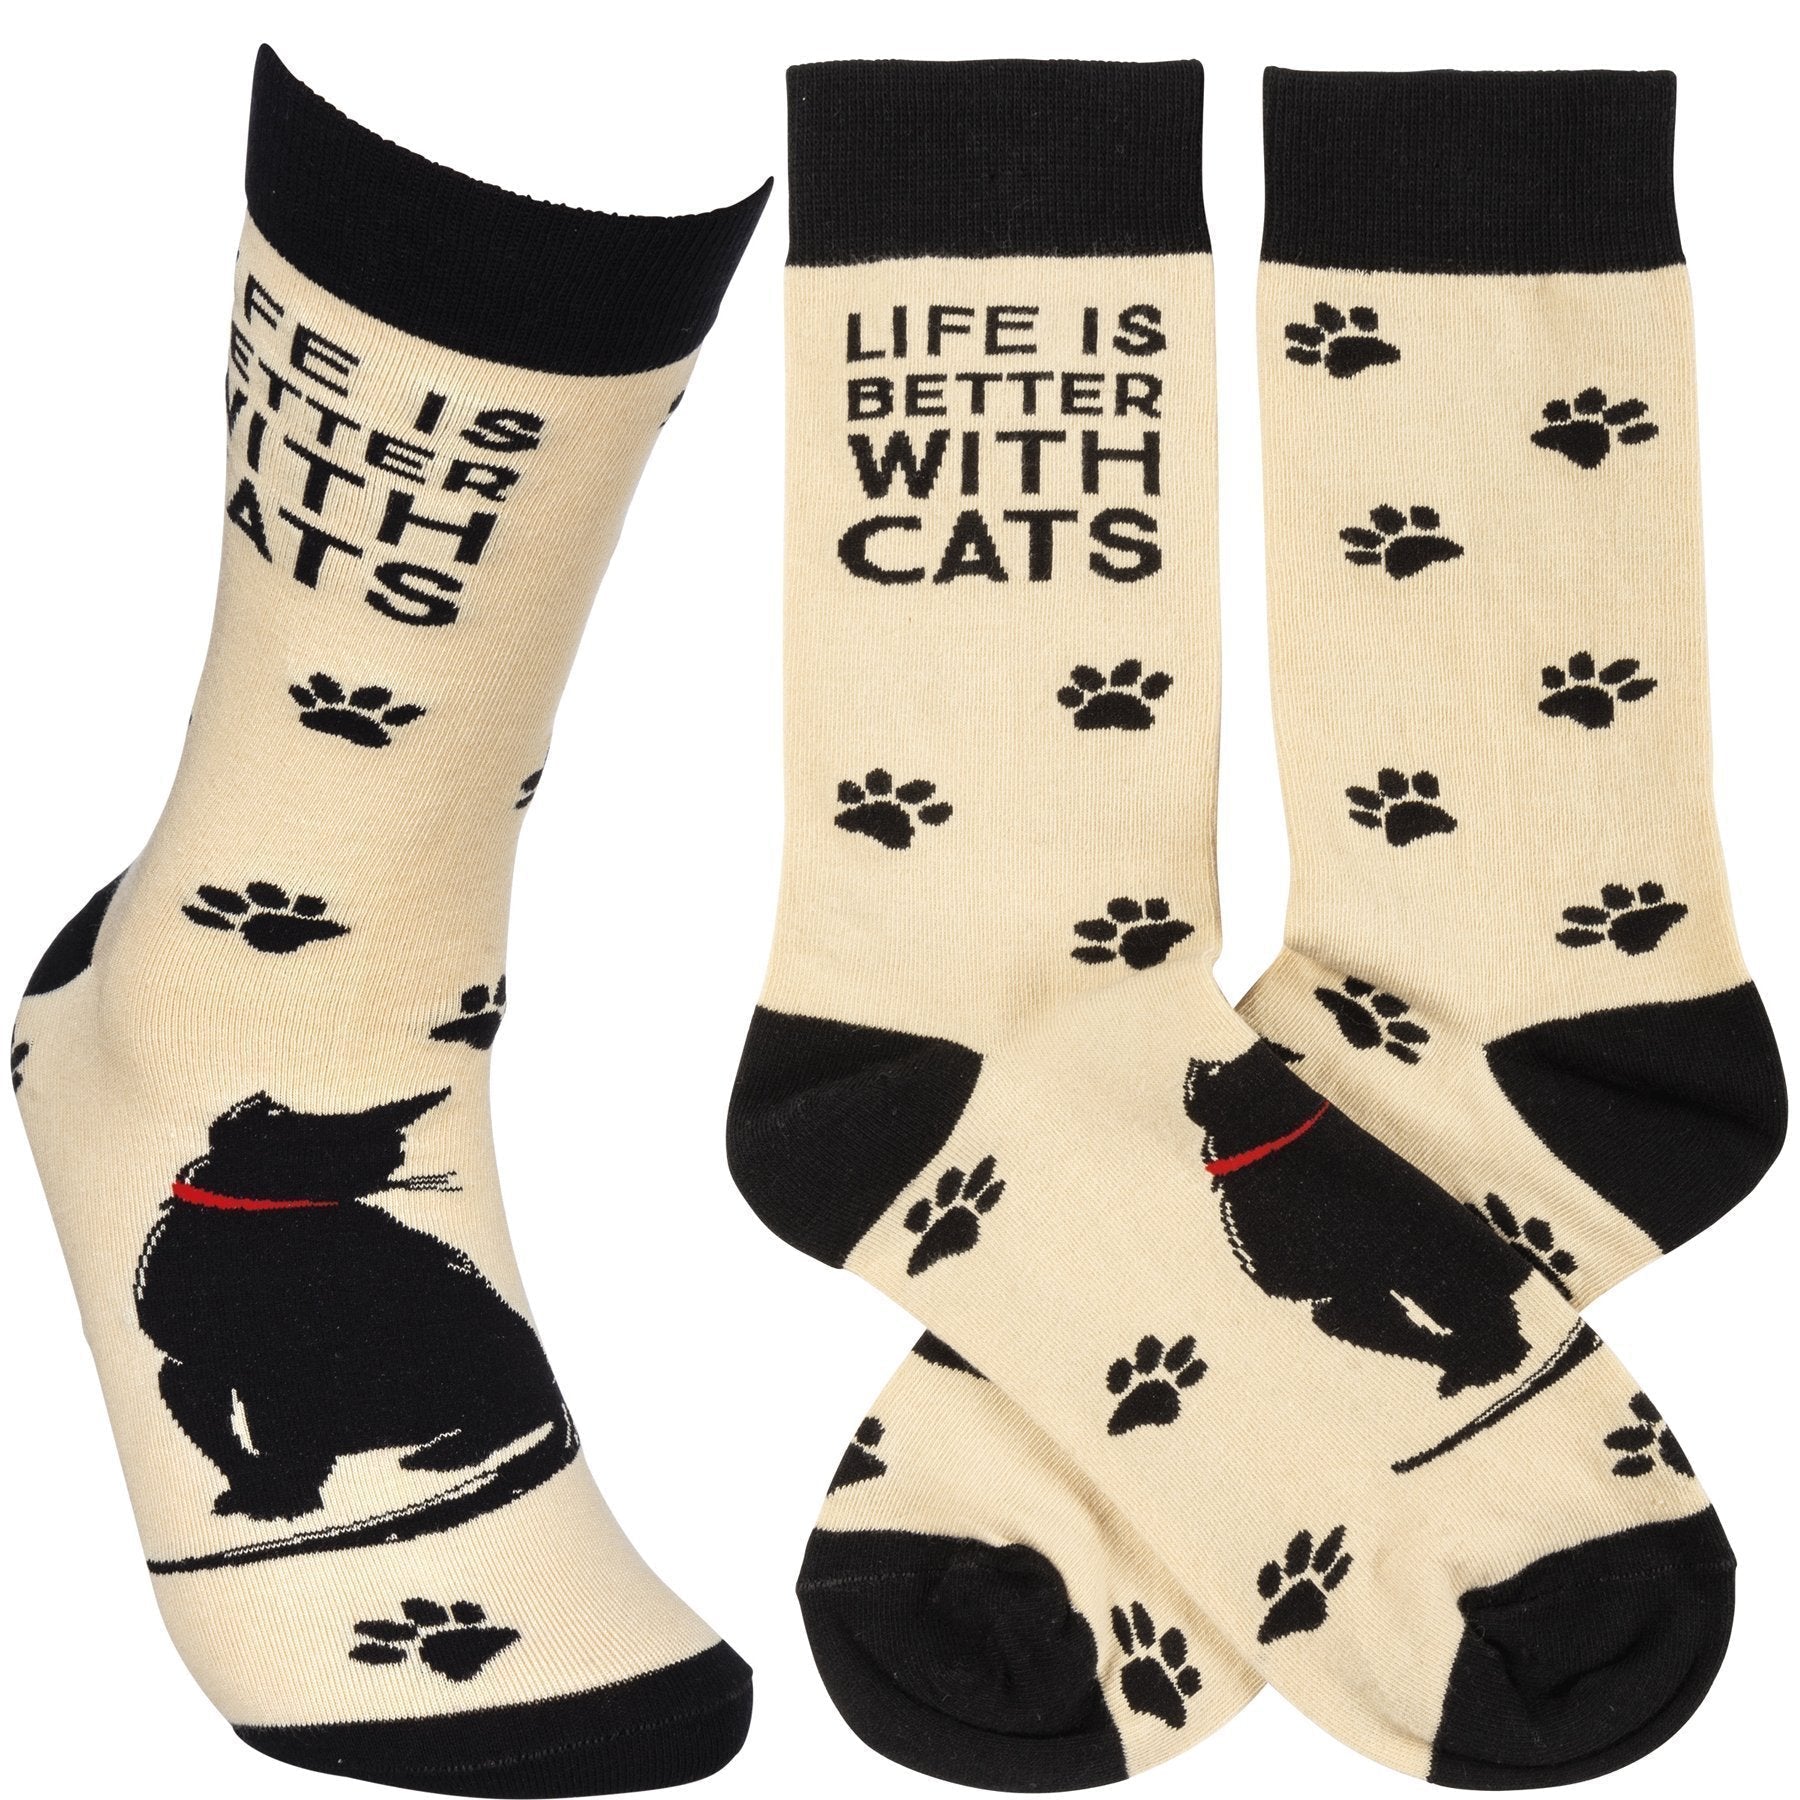 Life Is Better With Cats Socks for Cat Lovers